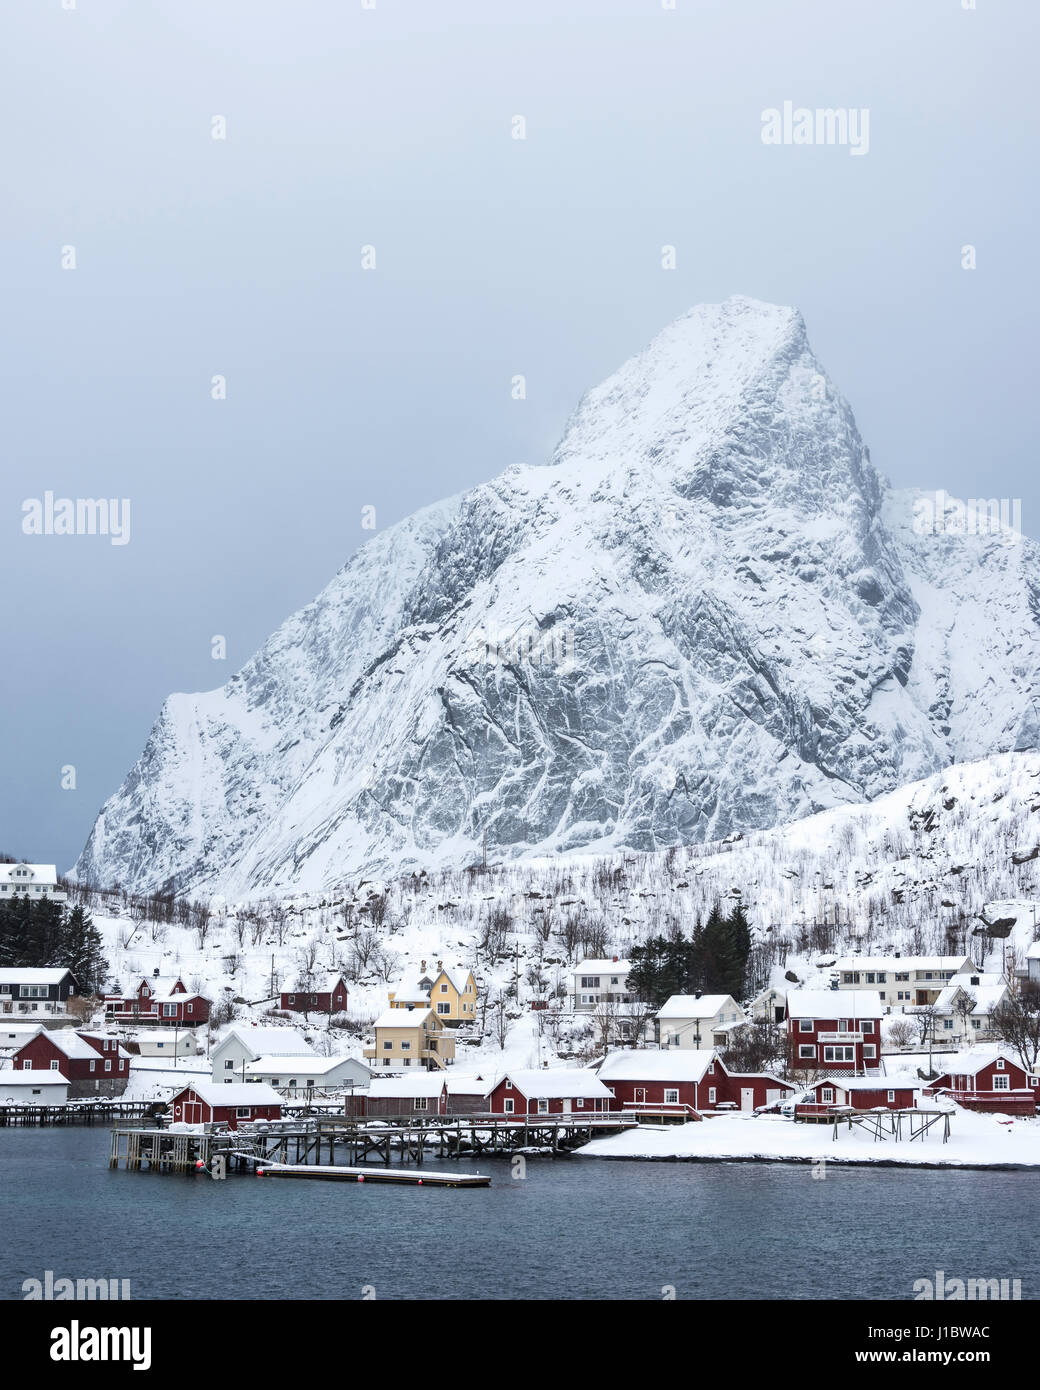 The village of Hamnoy on the Moskenesøya, part of the Lofoten Island chain, Norway in winter. Stock Photo